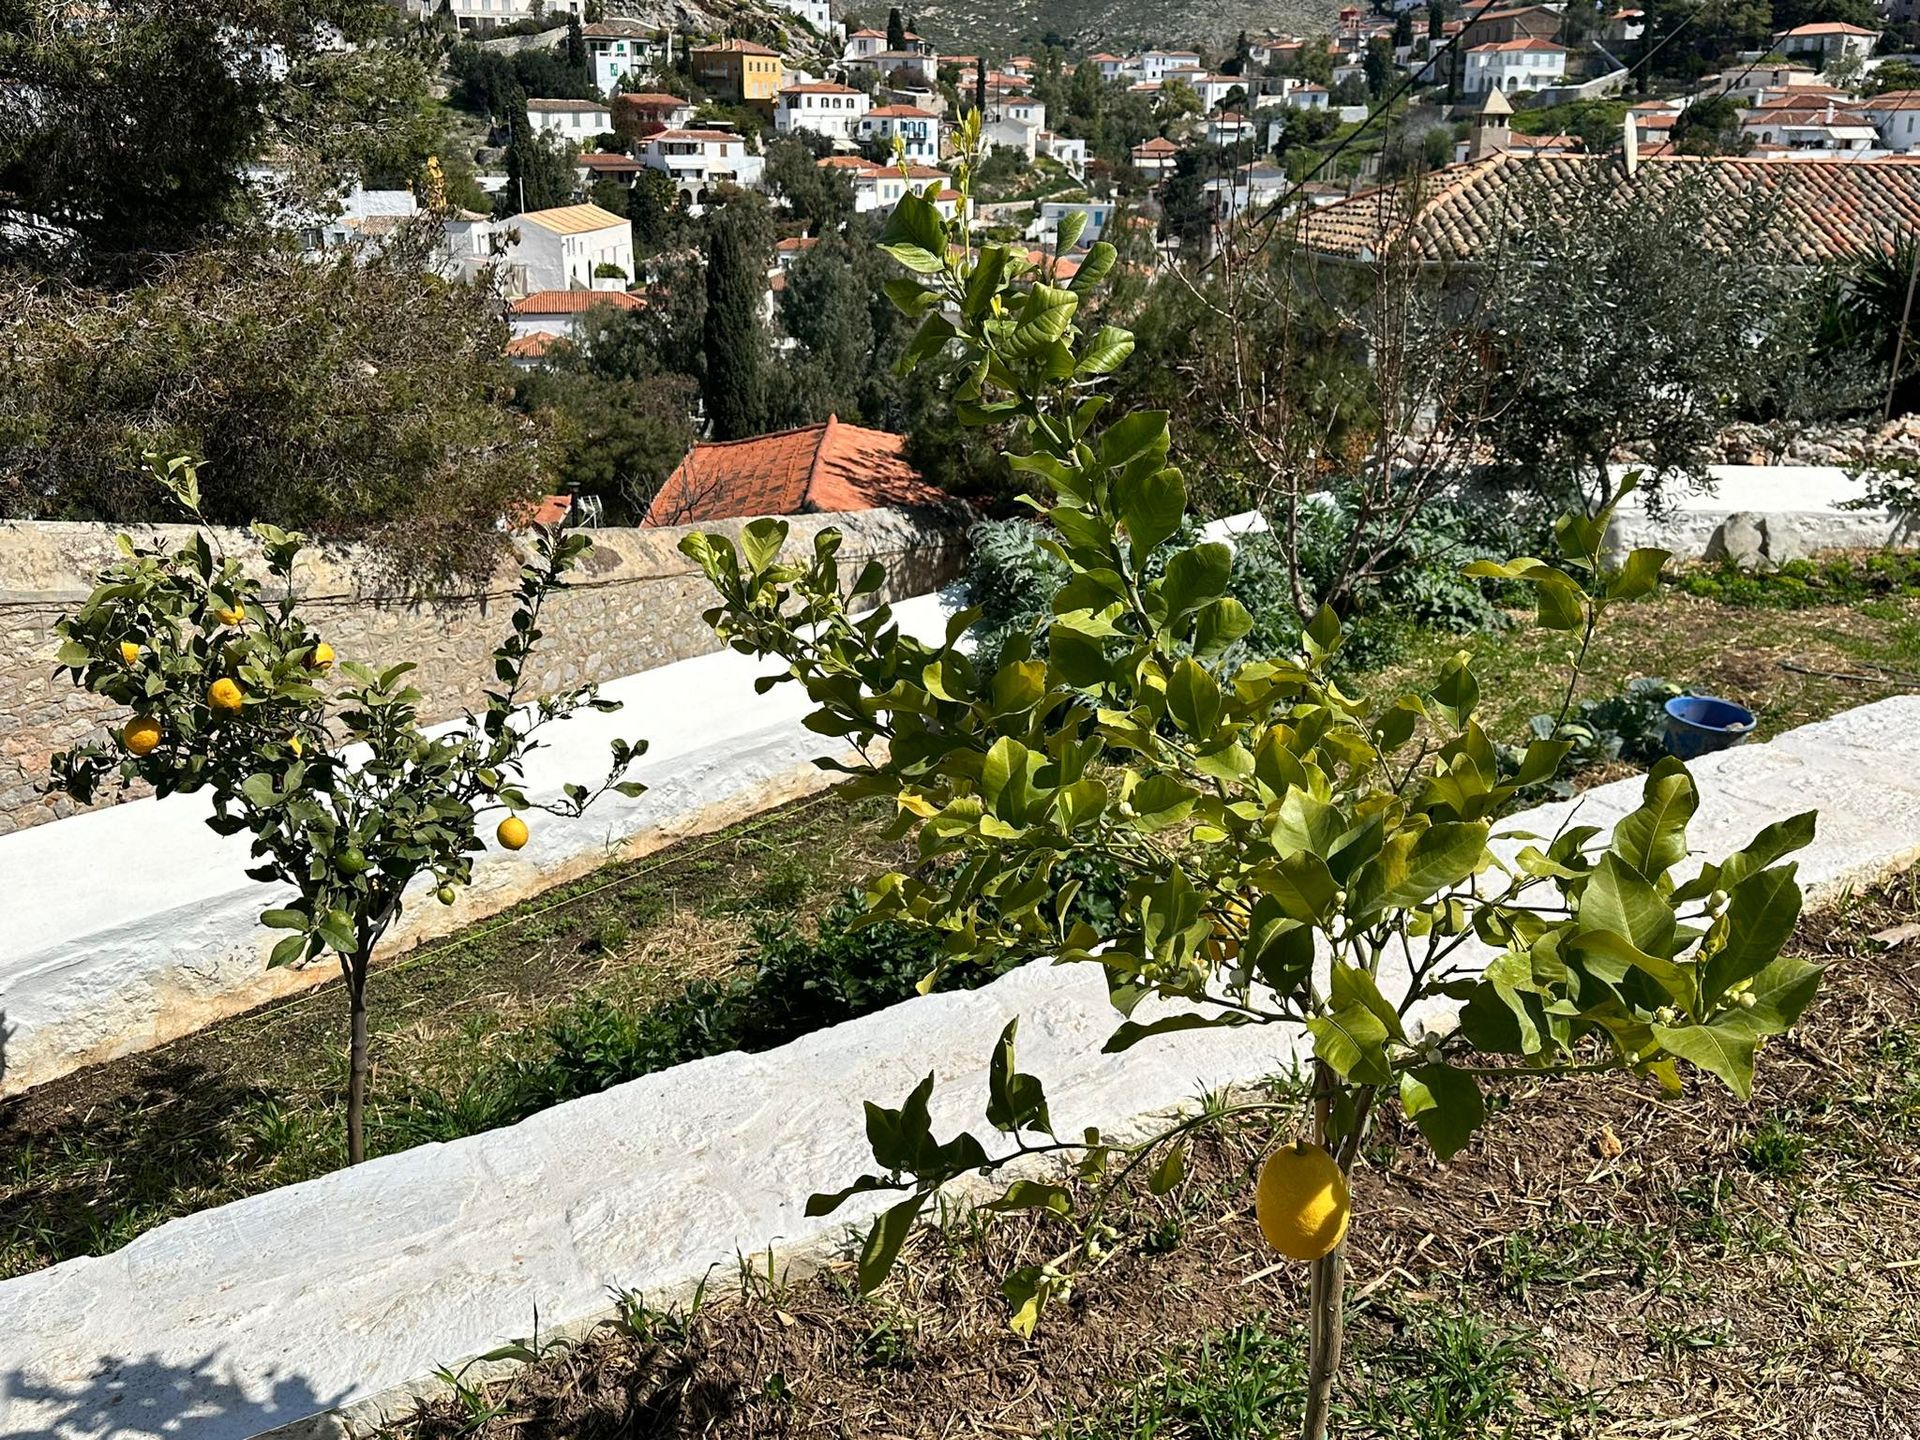 Wedding guest location can pick their own lemons at Hydra Homesteads, luxury holiday accommodation on Hydra Island Greece.